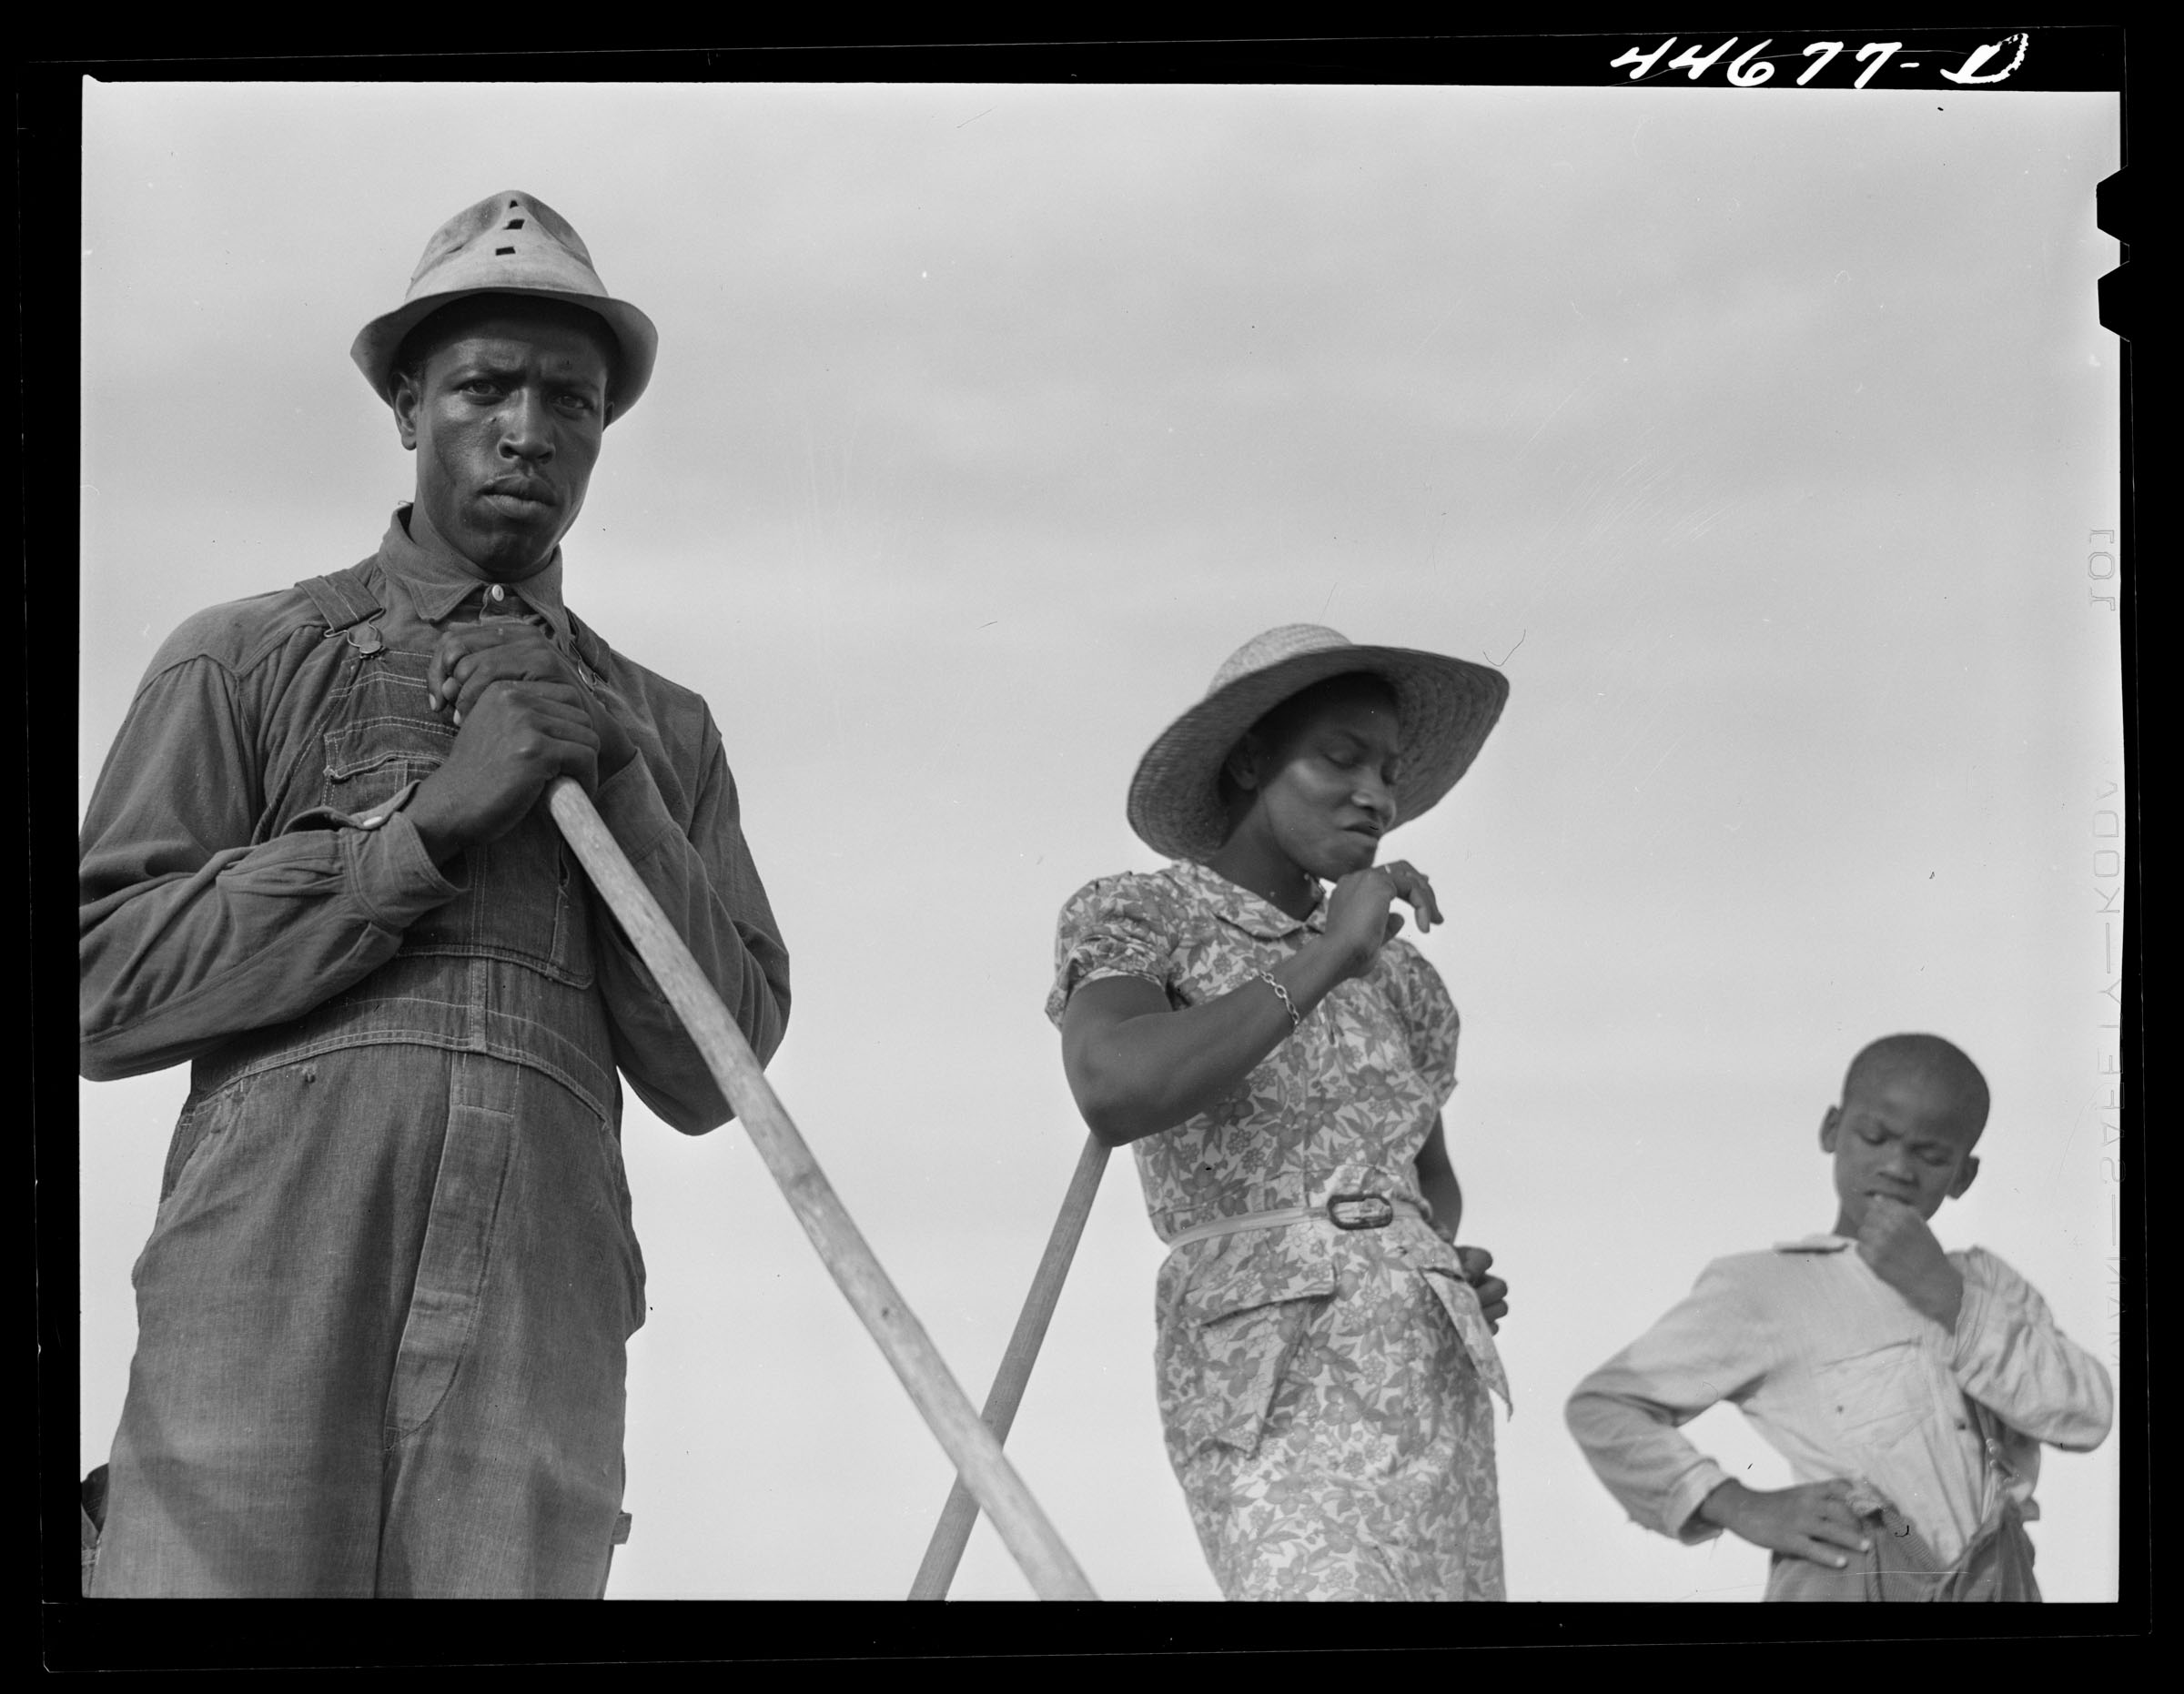 Black farmers standing and a cloudy sky in the background.